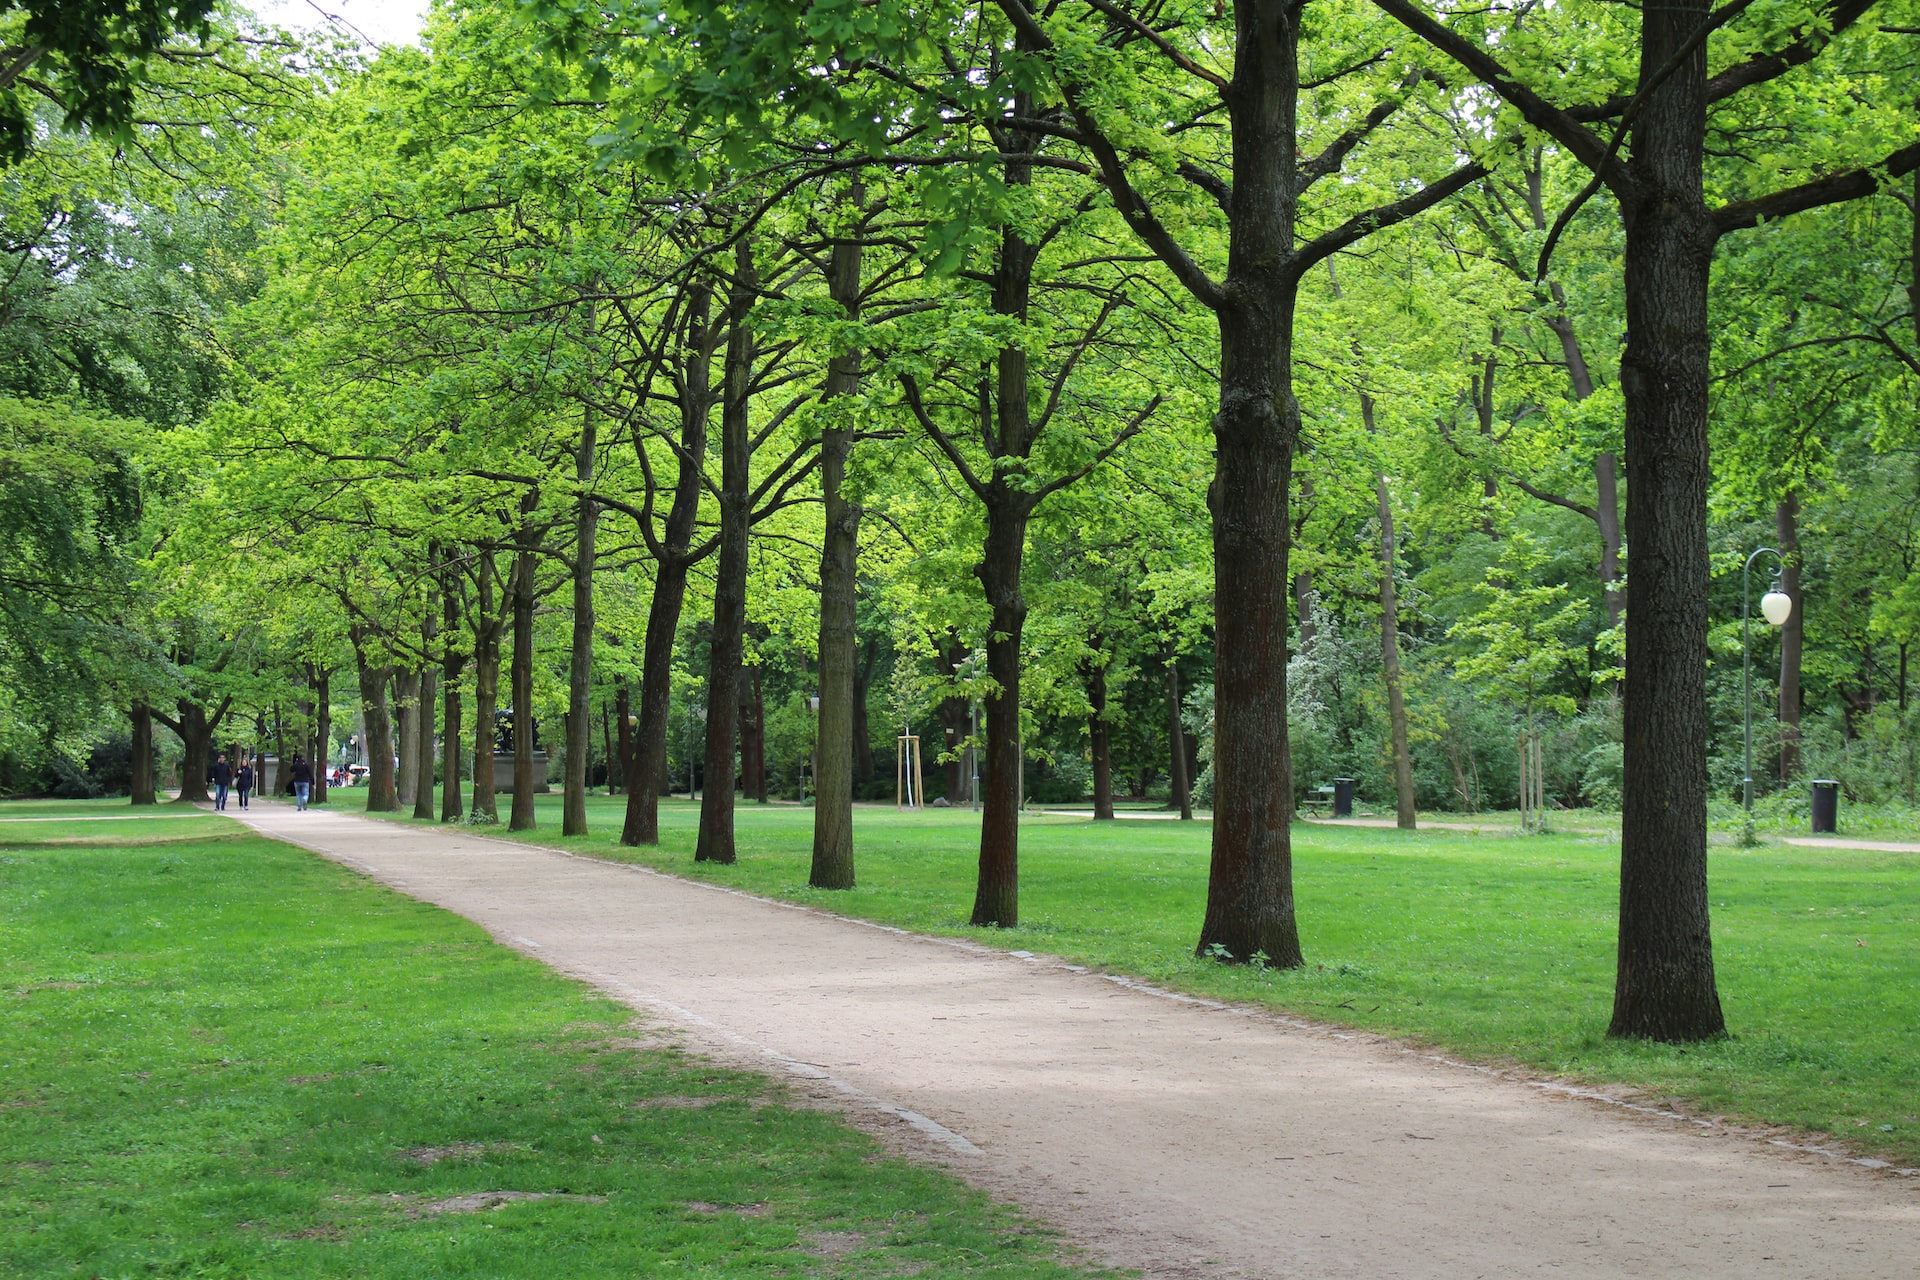 well-groomed trees in the park